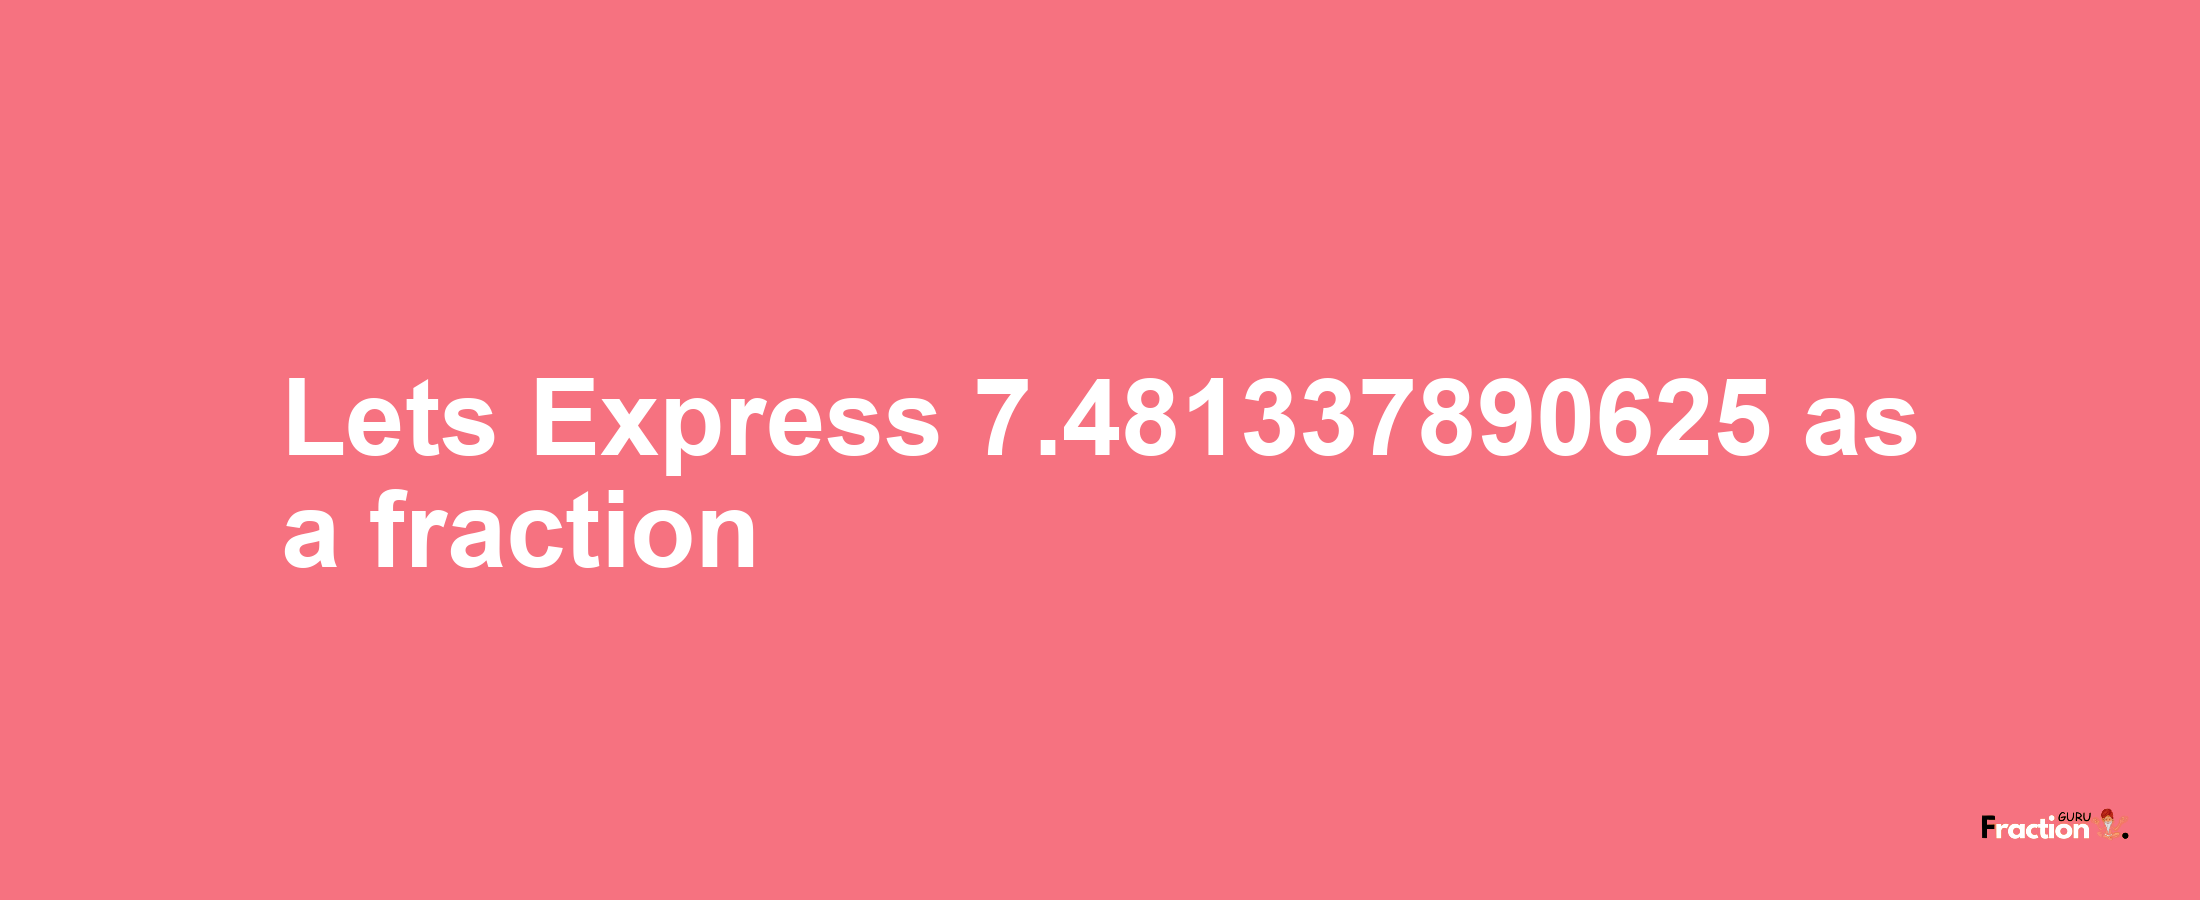 Lets Express 7.481337890625 as afraction